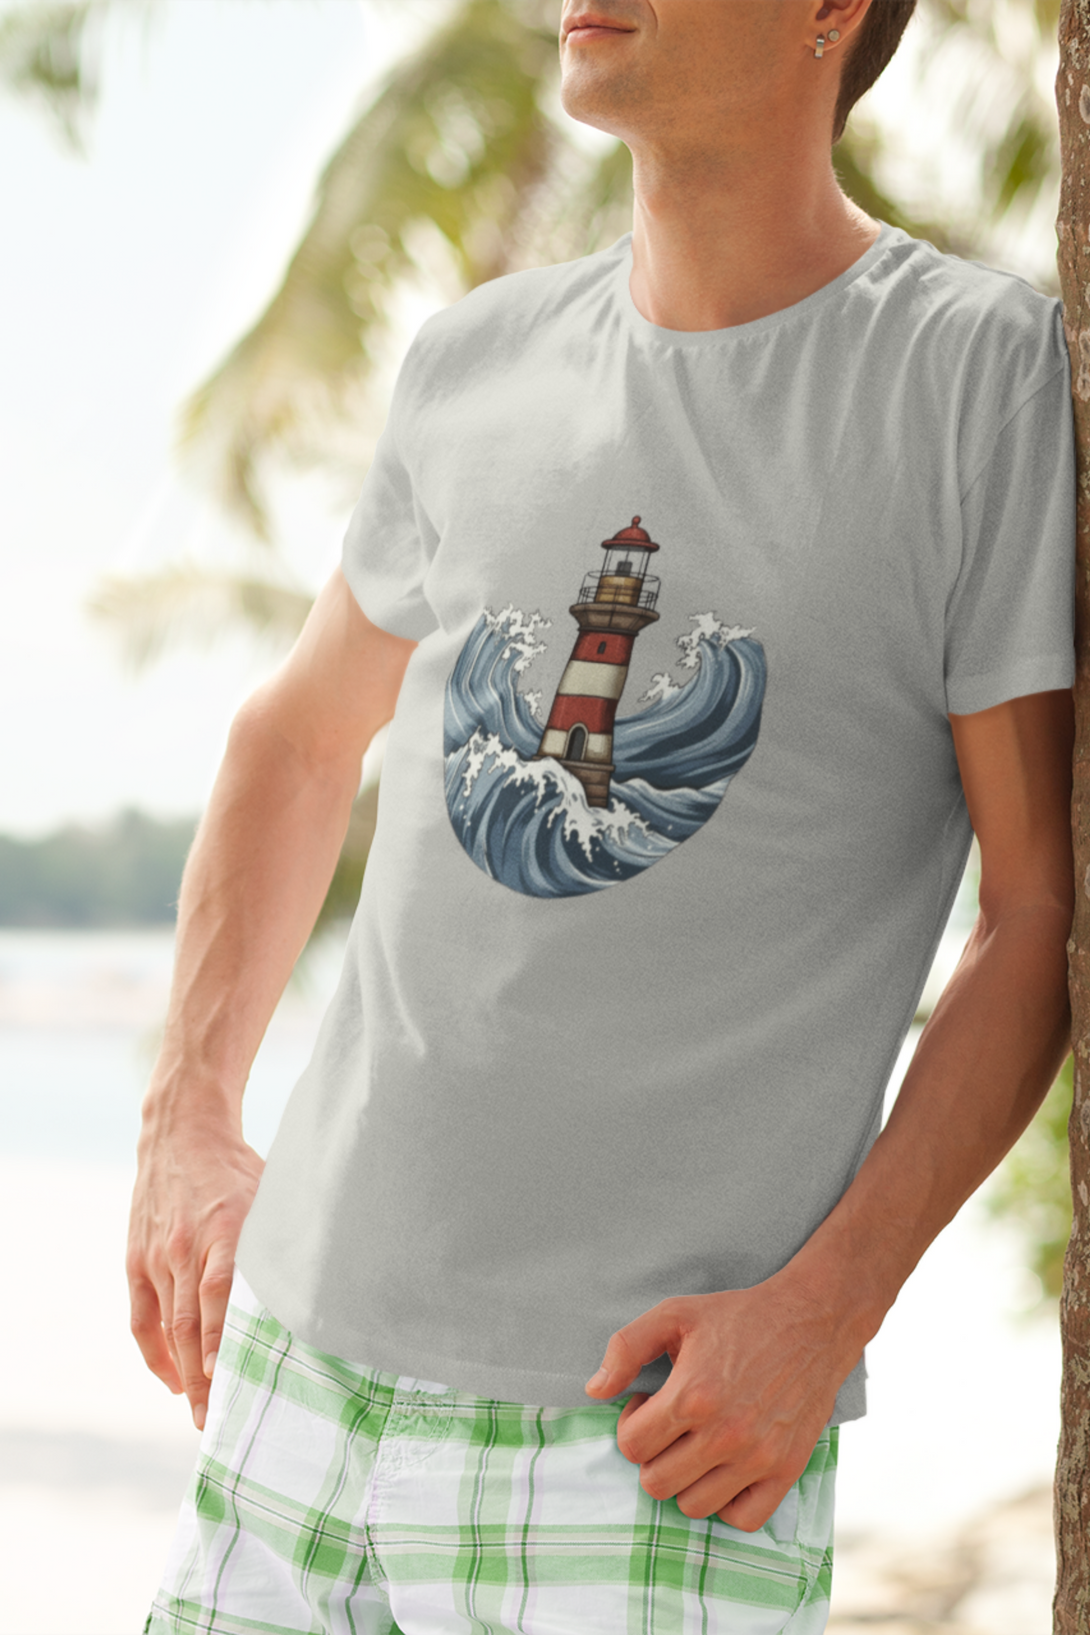 Lighthouse And Waves Printed T-Shirt For Men - WowWaves - 6